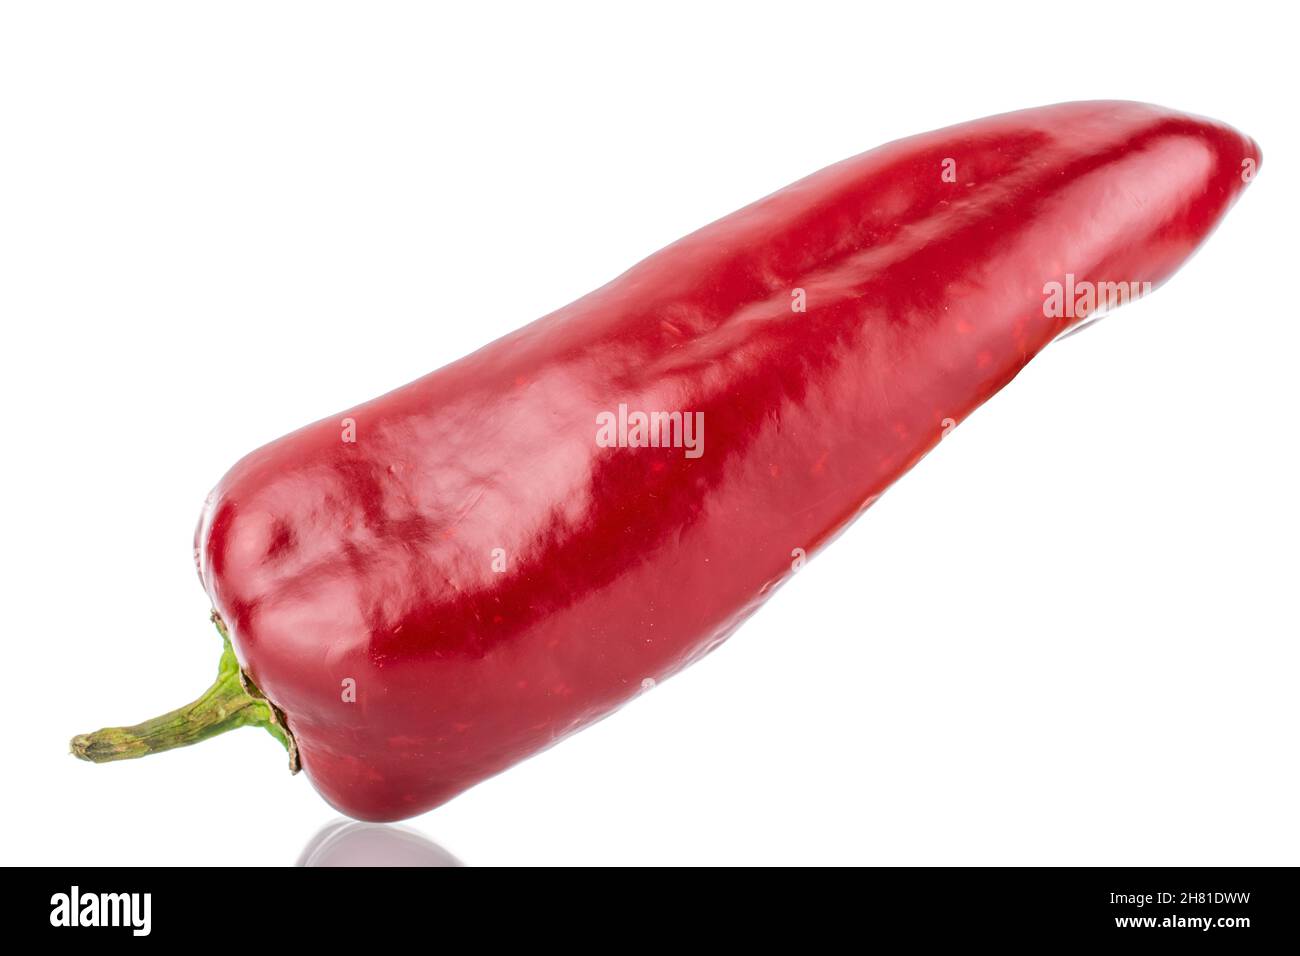 One red sweet pepper, close-up, isolated on white. Stock Photo